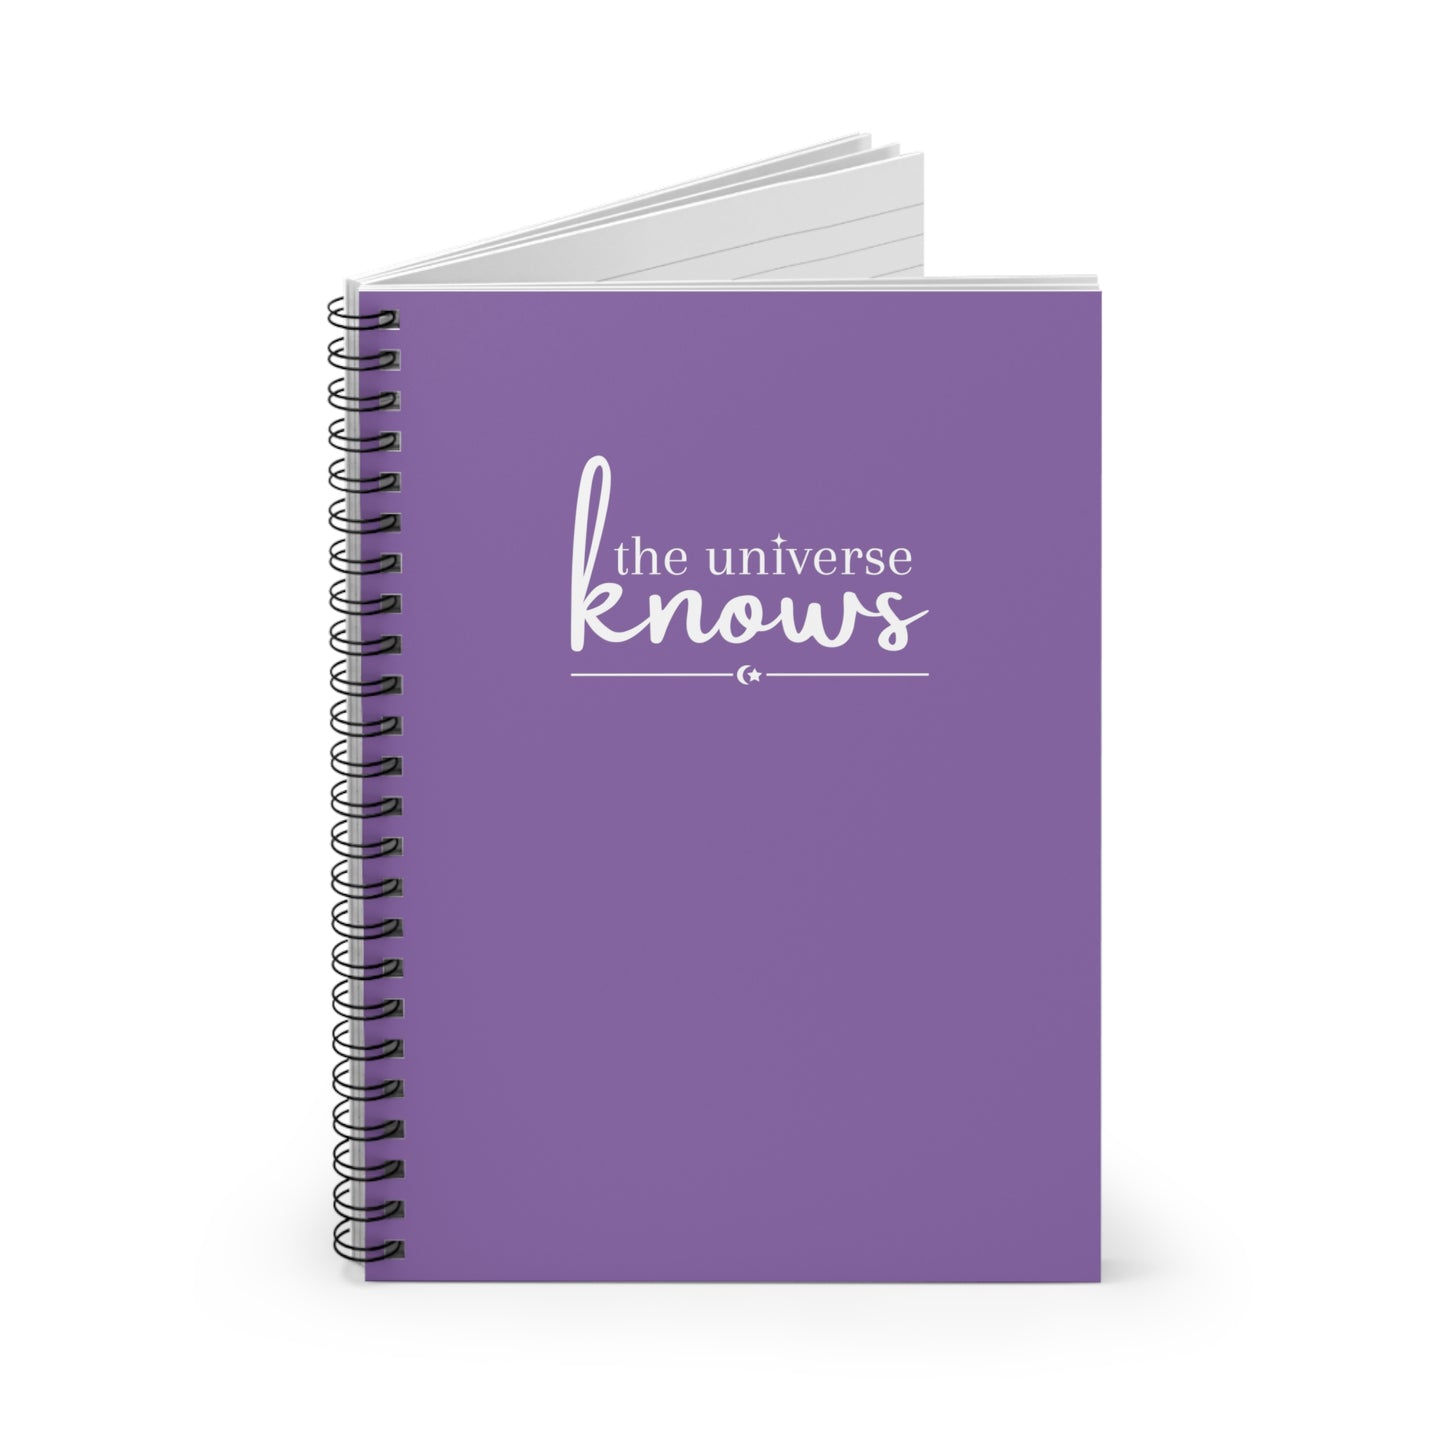 The Universe Knows Purple Spiral Notebook - Ruled Line